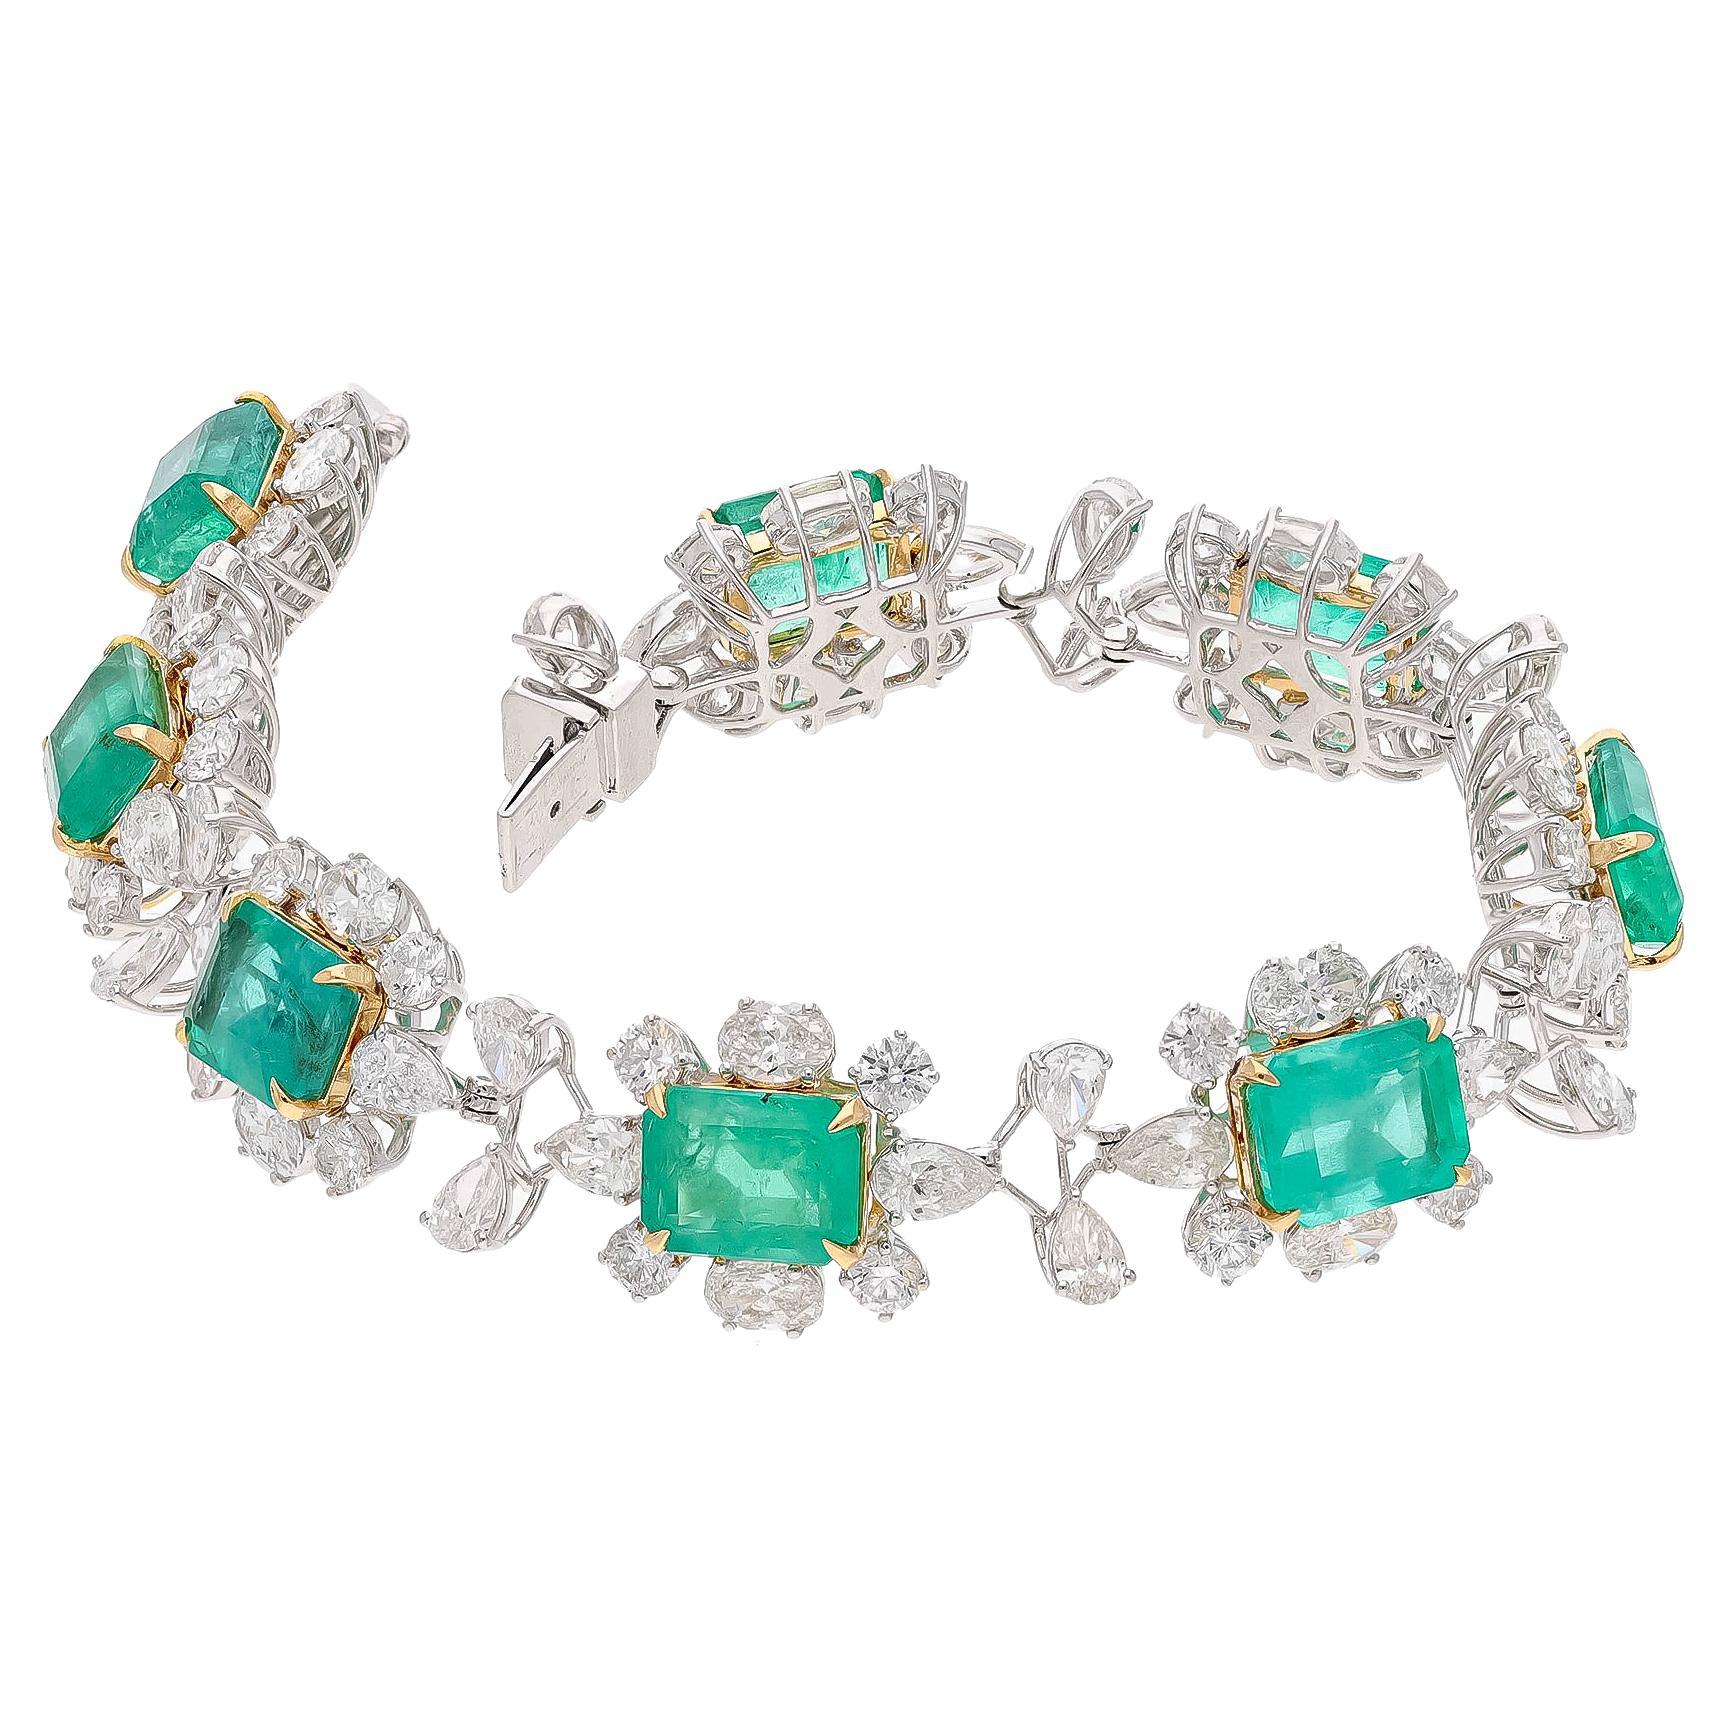 This is a stunning natural Zambian Emerald bracelet which has Emerald of very high quality and diamonds of very good quality . it has vsi clarity and G colour.

Emerald : 19.35 cts
diamonds : 12.67 cts
gold : 19.406 gms

Its very hard to capture the